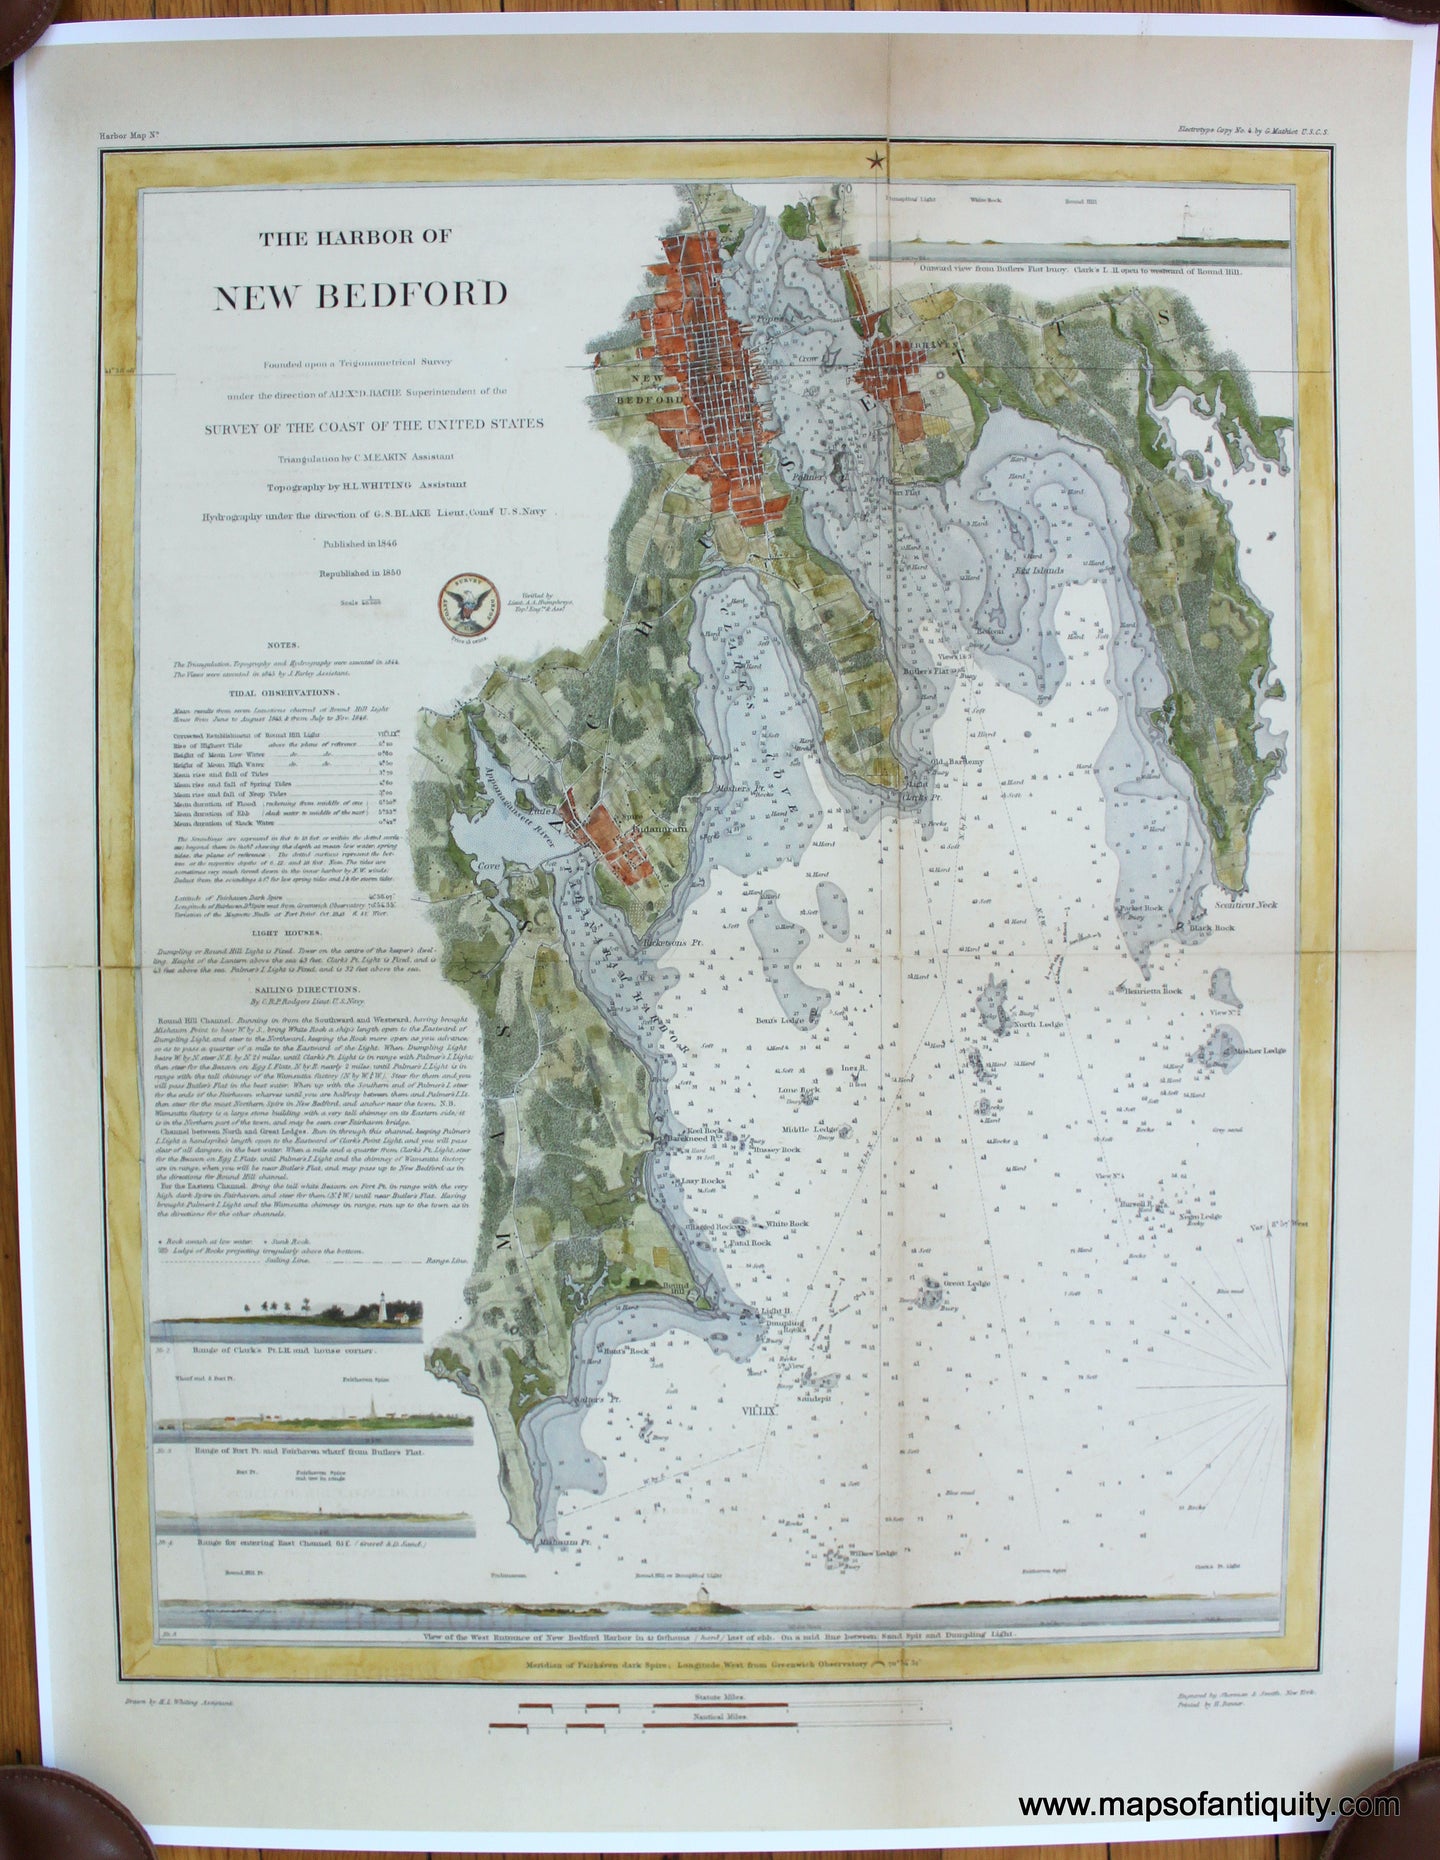 Reproduction-Reproductions-Antique-United-States-Coast-Survey-The-Harbor-of-New-Bedford-Massachusetts-Nautical-Chart-Charts-Maritime-Maps-of-Antiquity